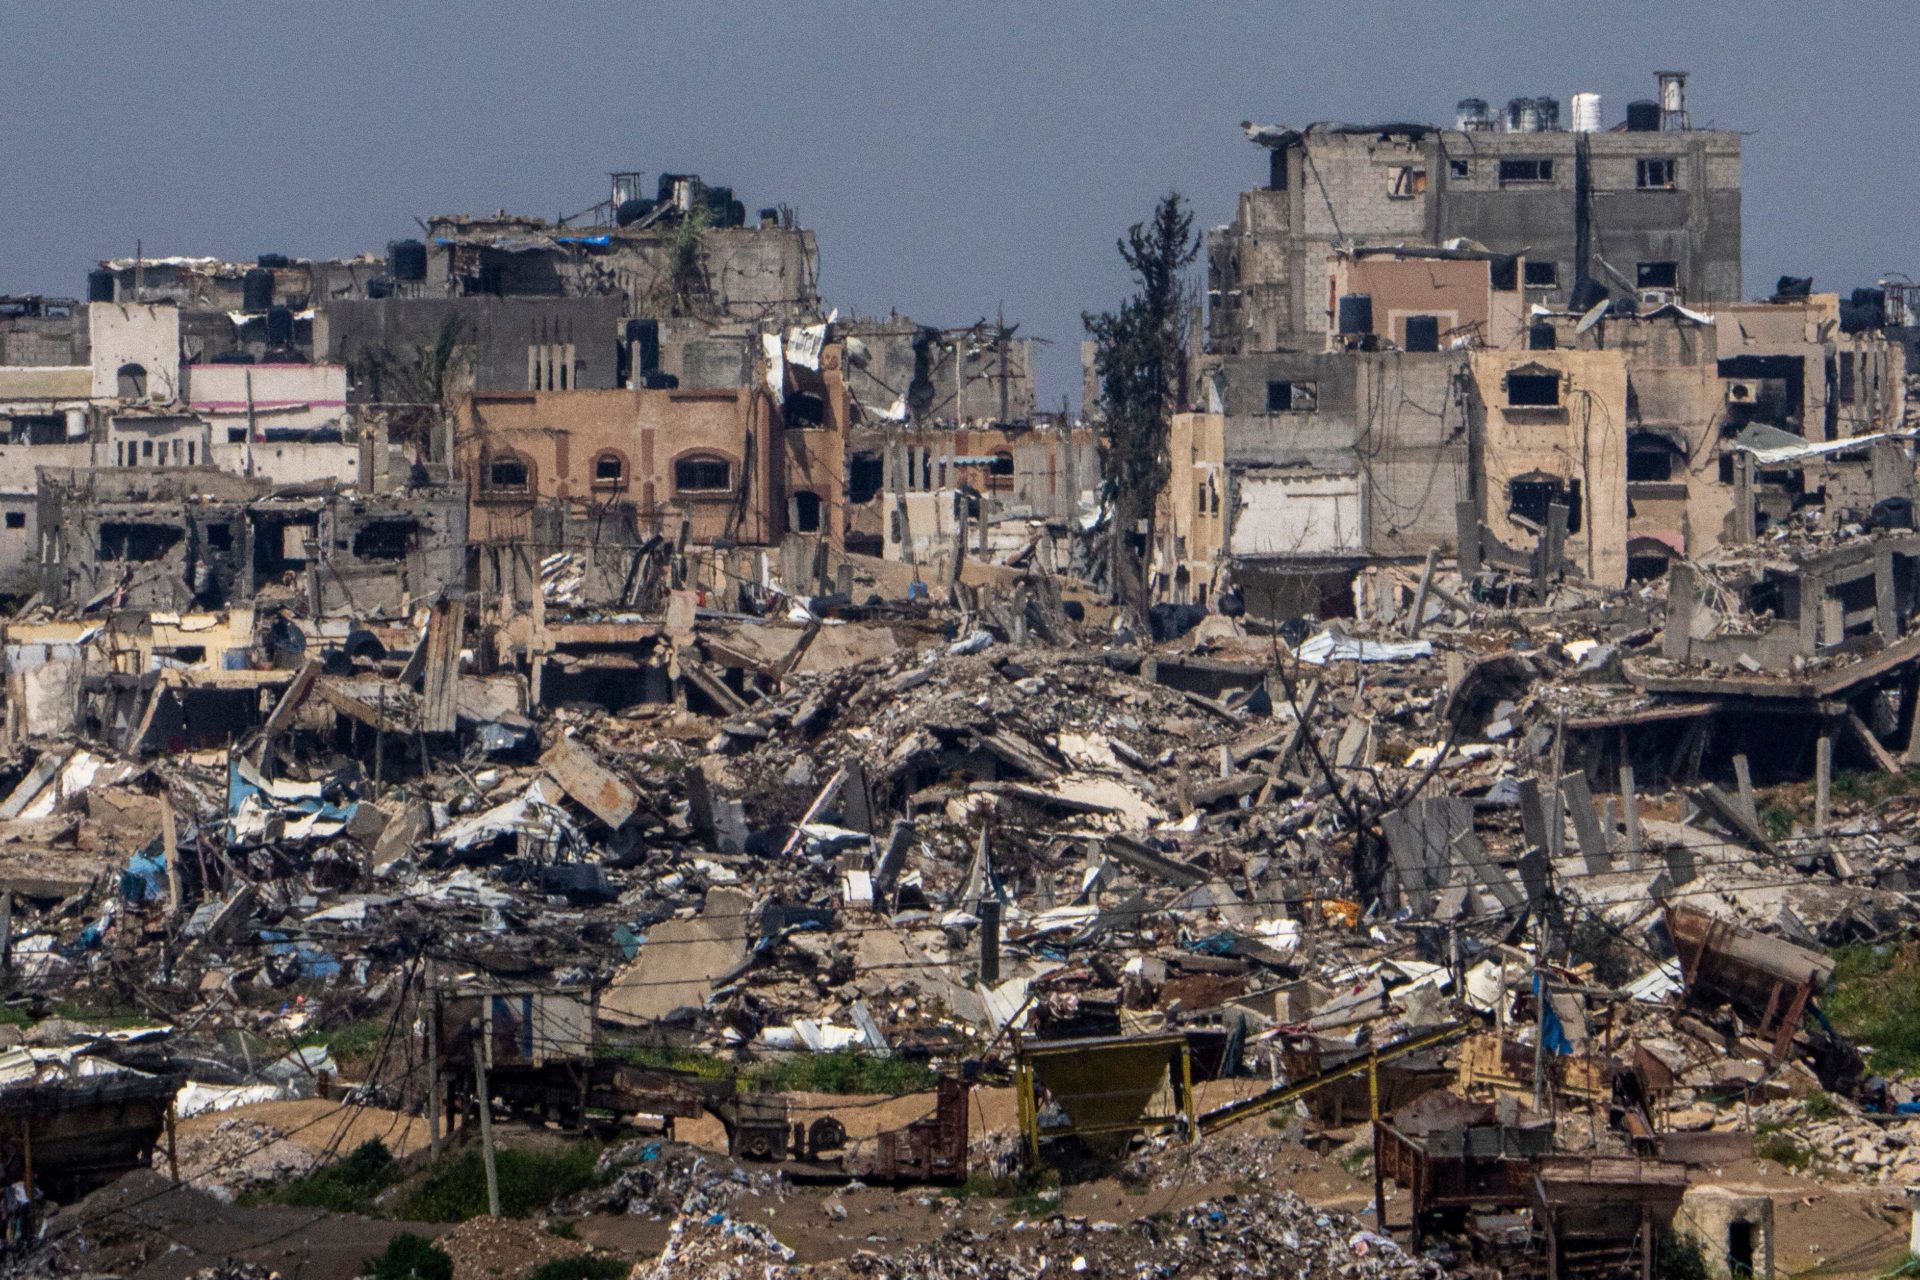 Main image shows destroyed buildings inside the Gaza Strip, as seen from southern Israel